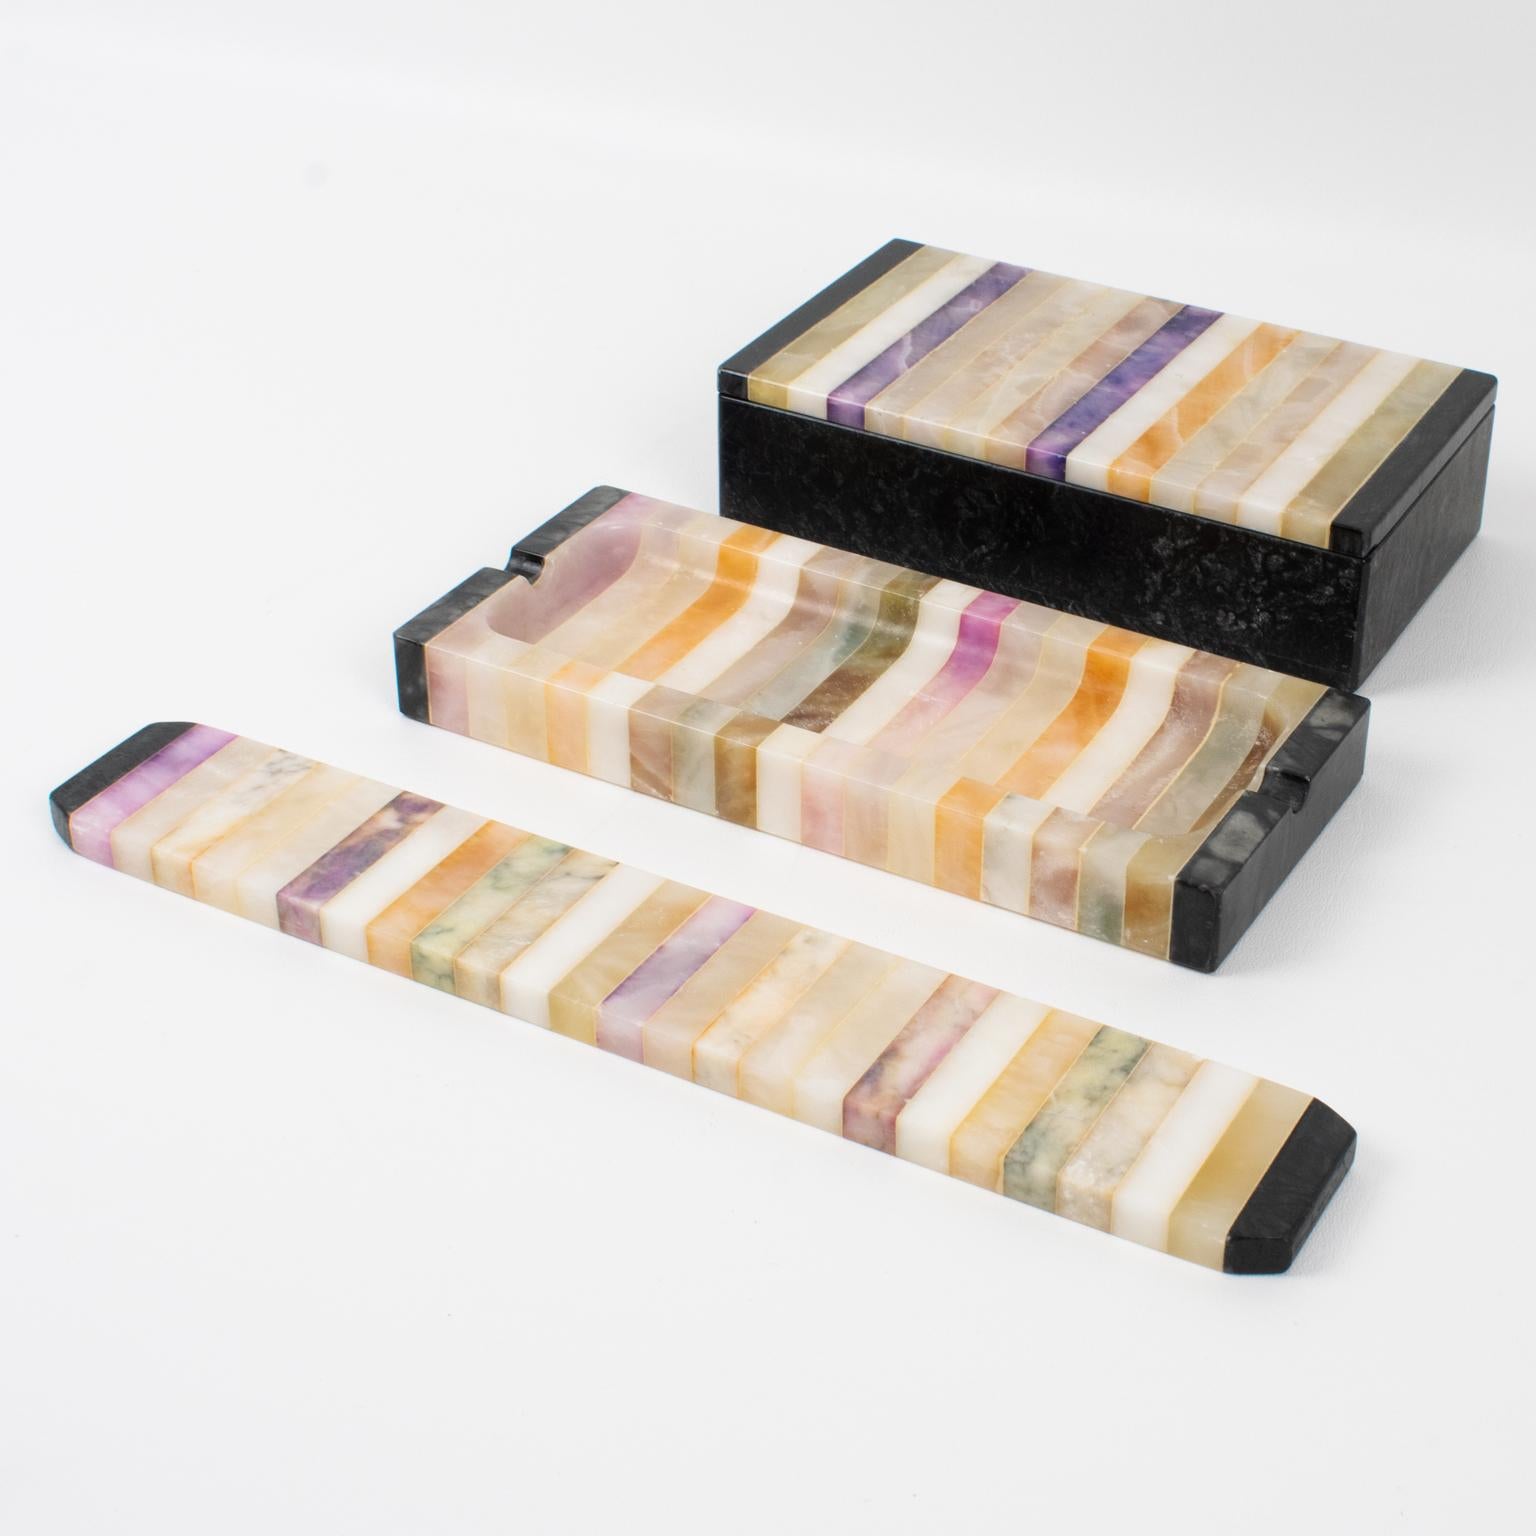 Mid-Century Modern Mid-Century Marble, Onyx Marquetry Desk Set Box, Pen Holder, Ruler, Italy 1960s For Sale